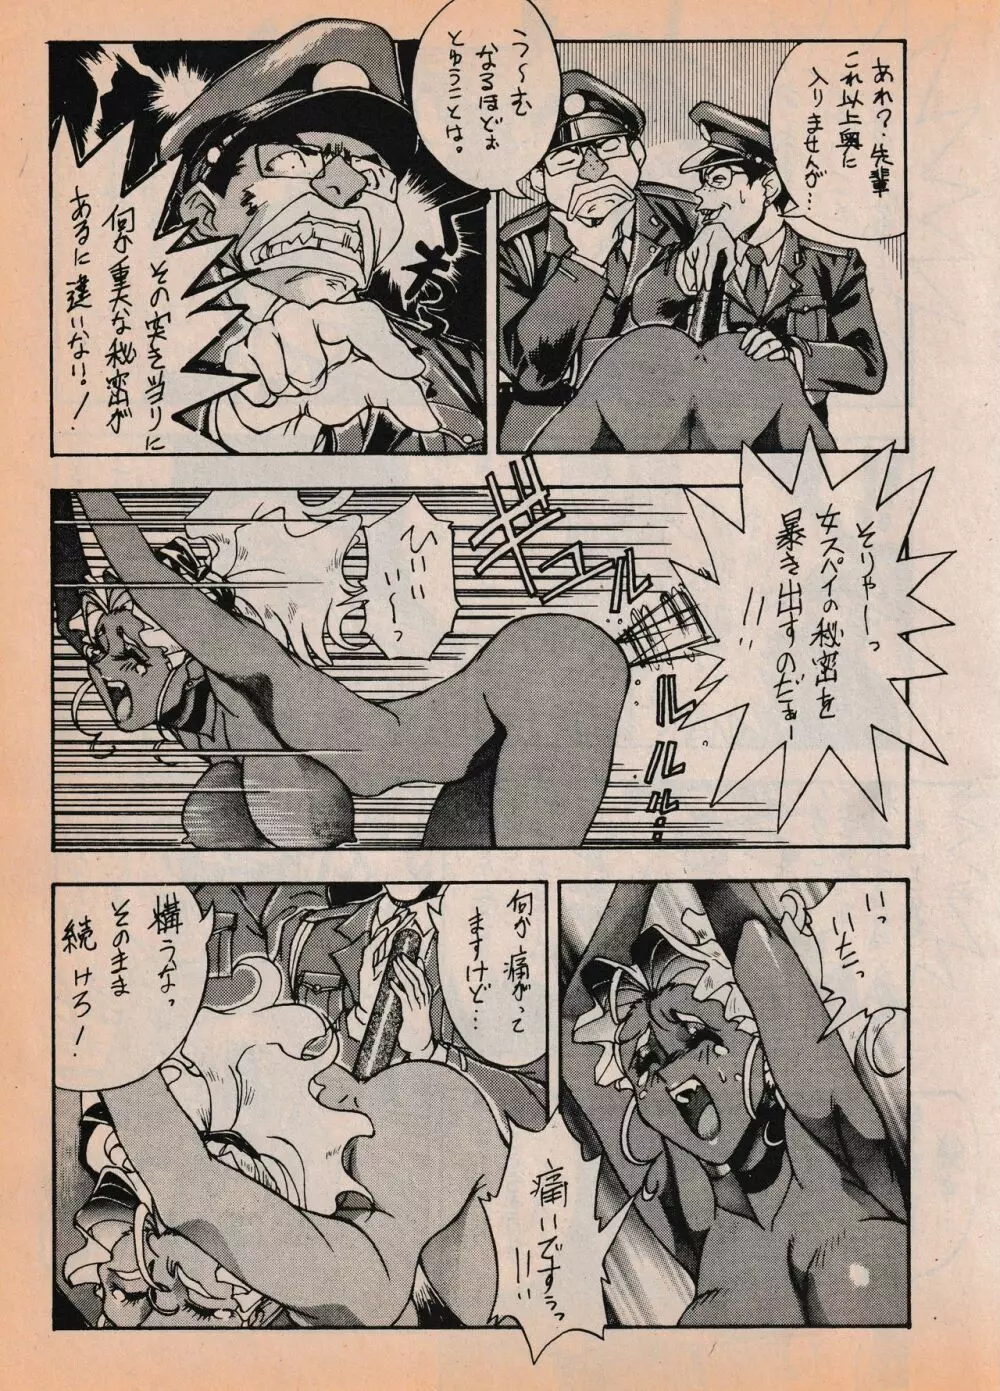 Sailor X vol. 7 - The Kama Sutra Of Pain Page.88